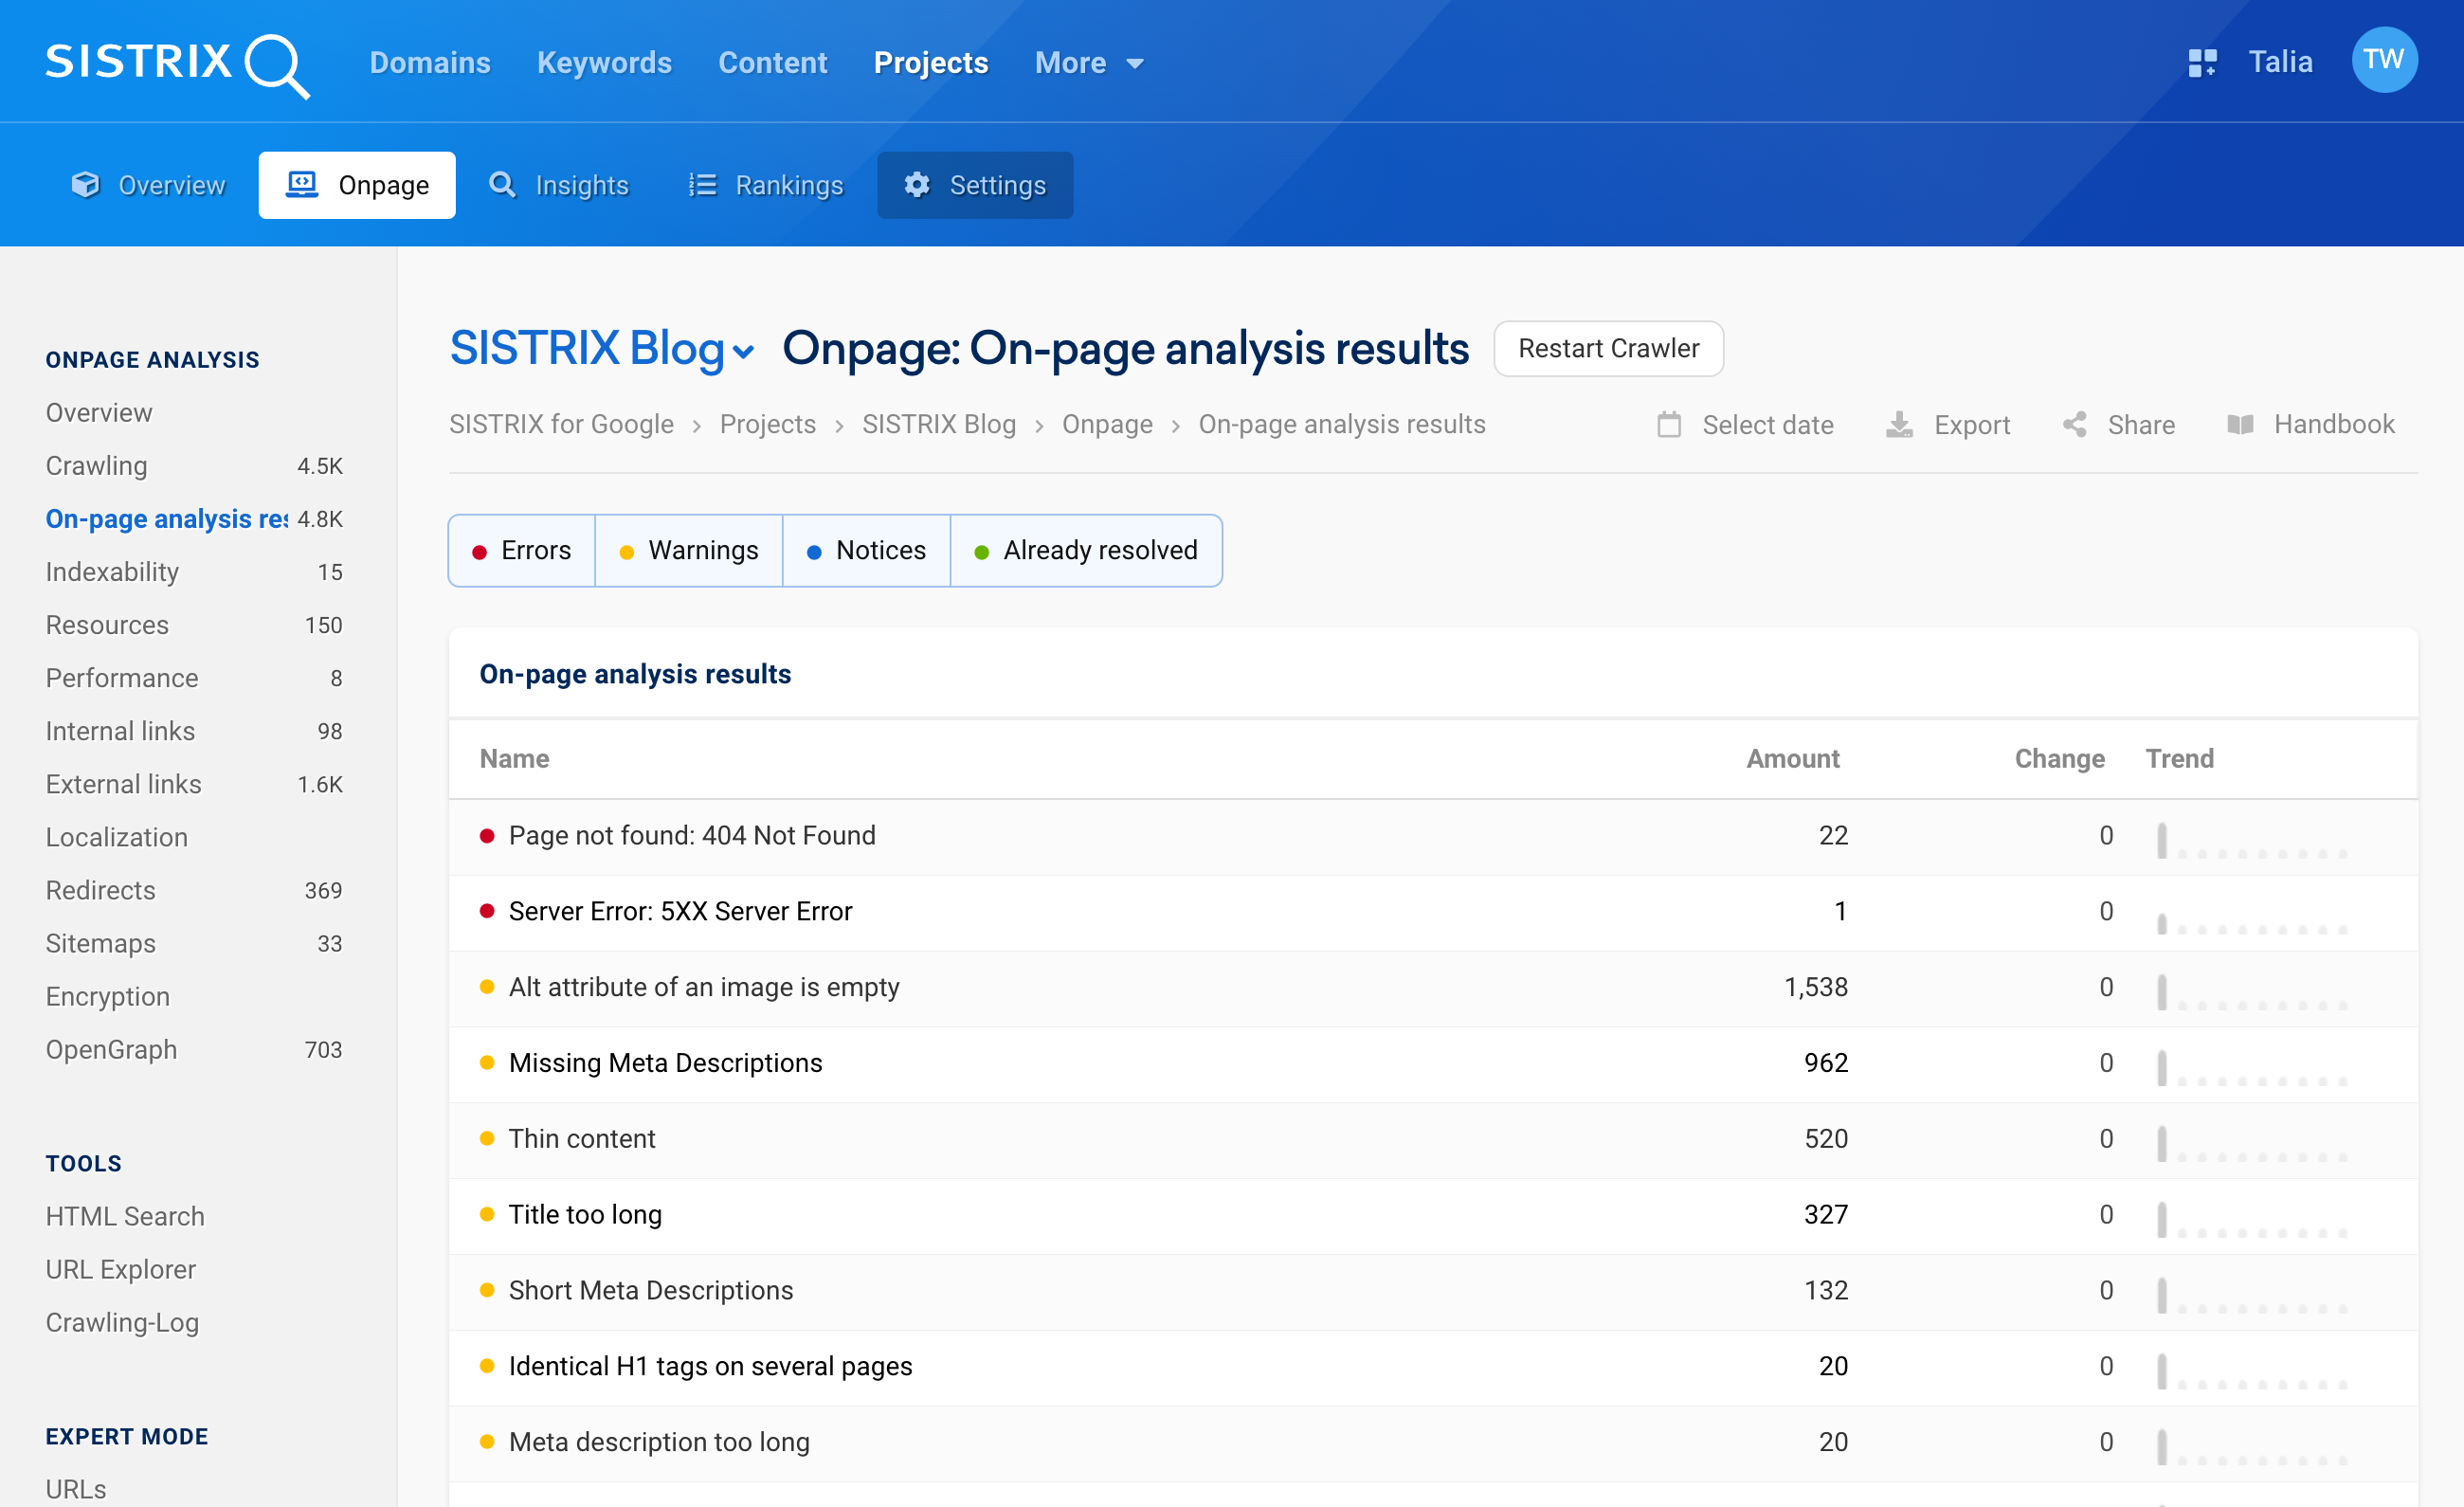 The onpage analysis results page of a SISTRIX Onpage project. SEO errors, warnings and notices are displayed here.